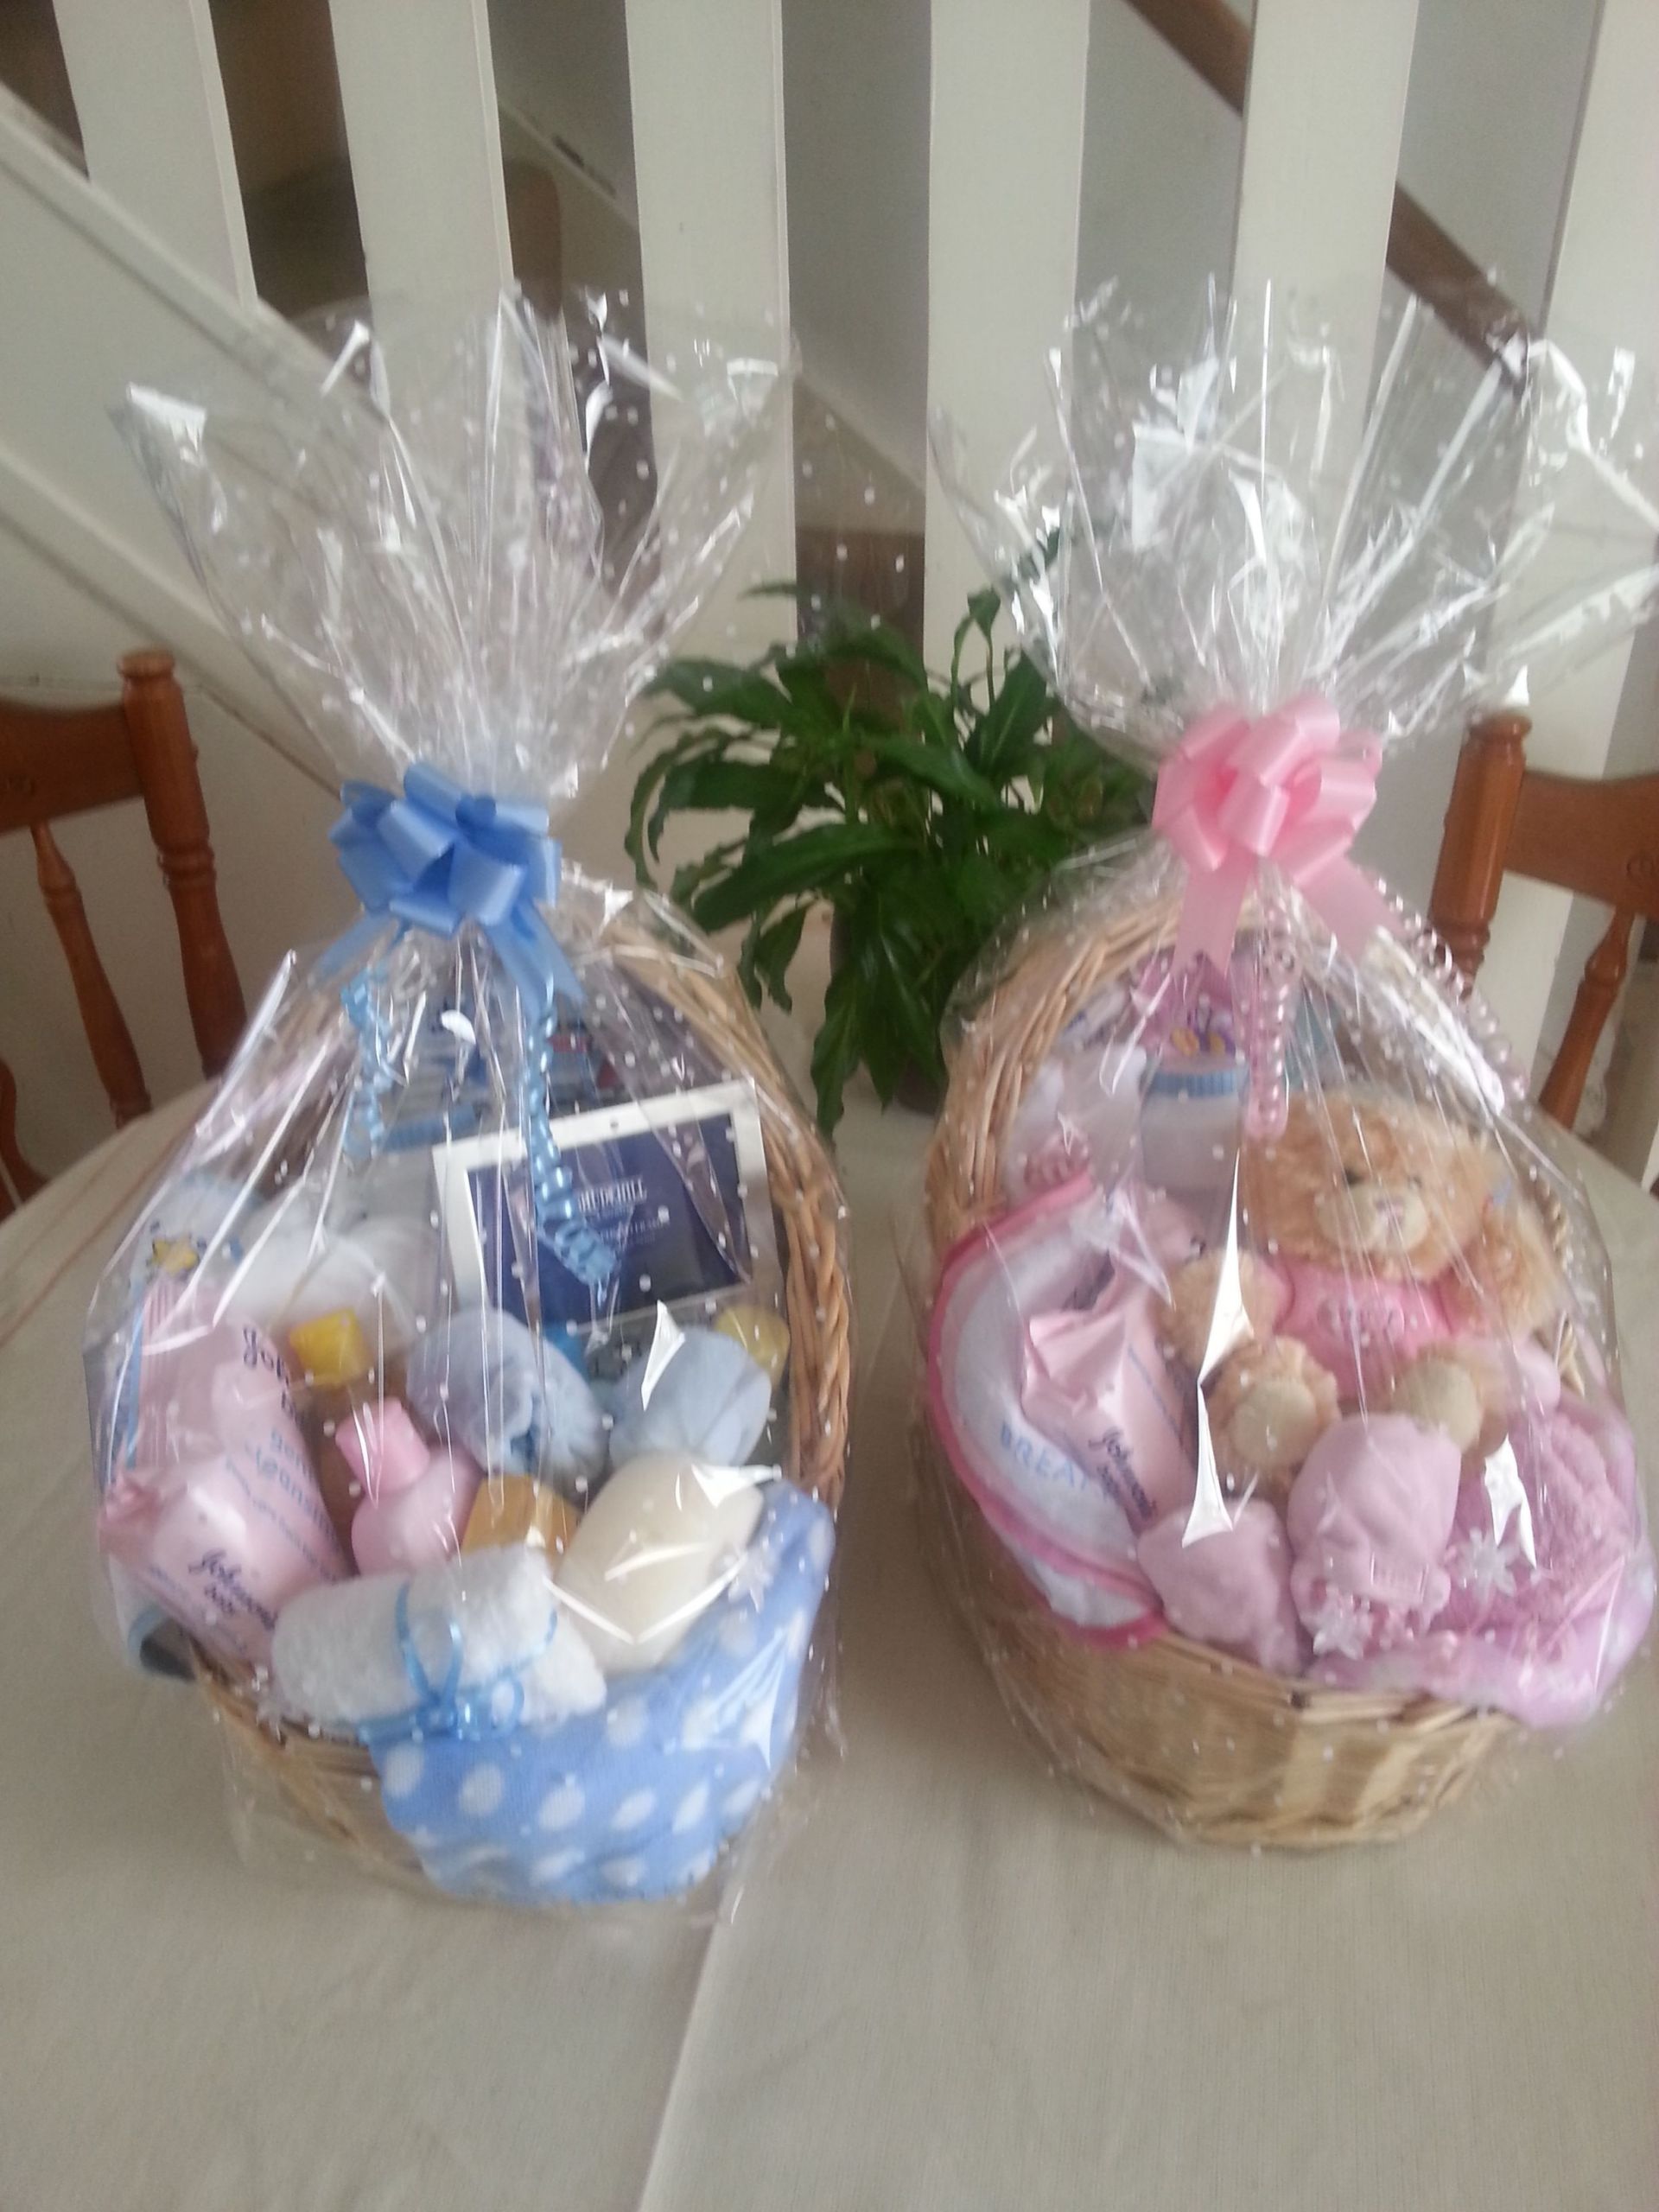 Born Baby Gift Ideas
 New Born Baby Gift Baskets diaper baby